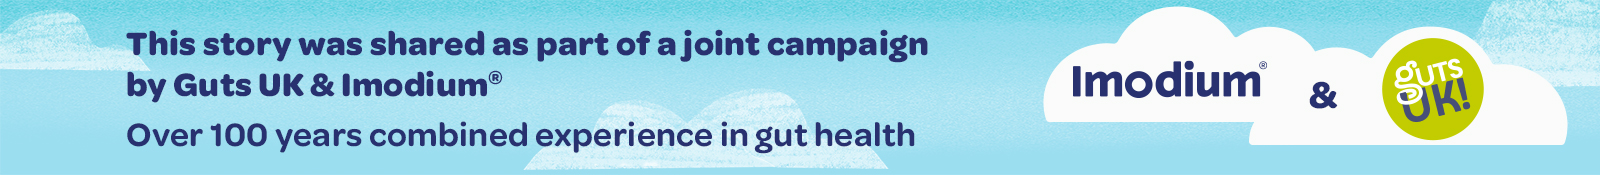 This story was shared as part of a joint campaign by Guts UK and Imodium. Over 100 years combined experience in gut health.